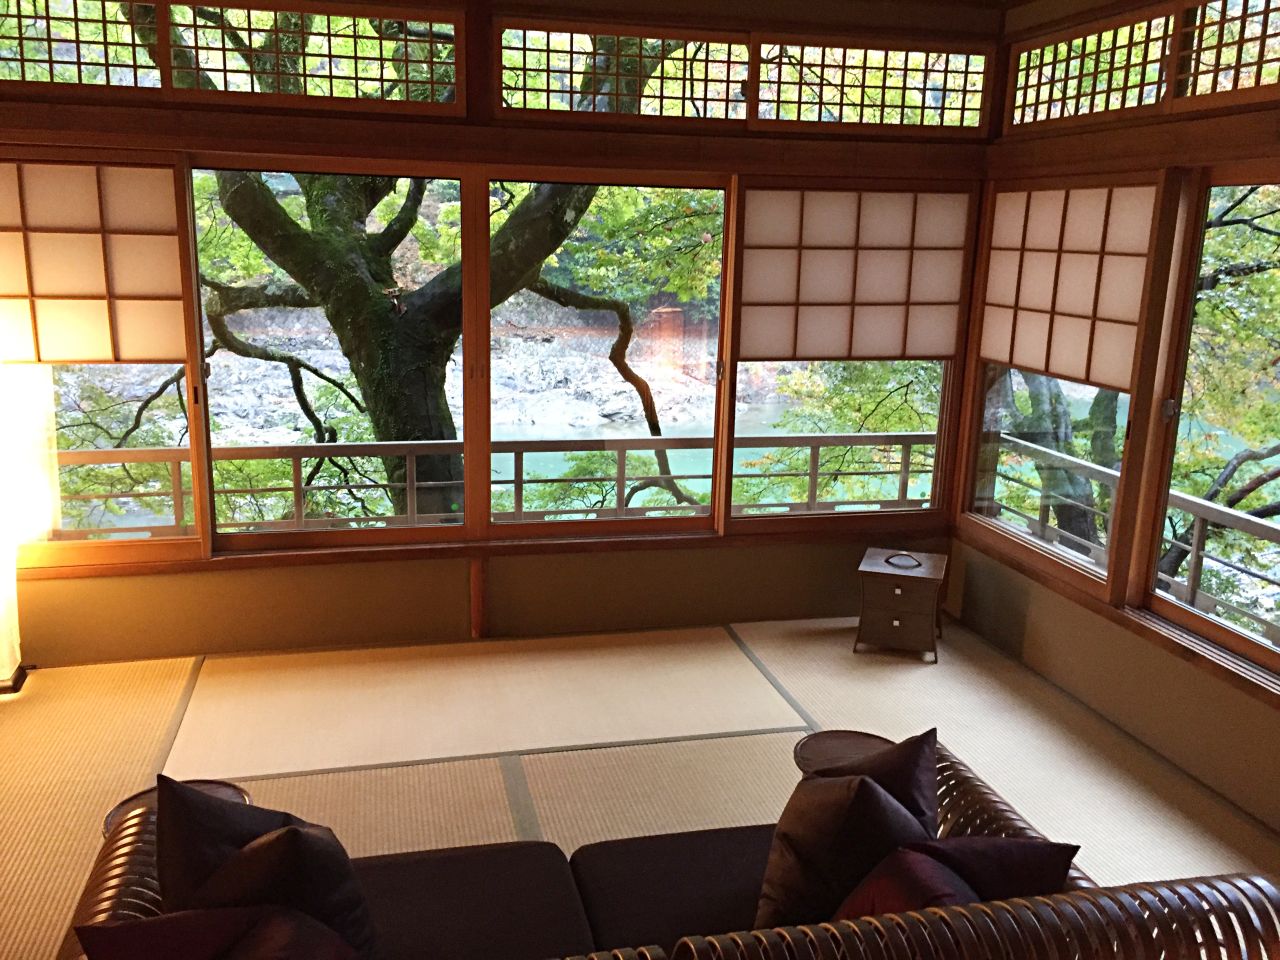 The guest rooms of the century-old, renovated ryokan are the heart of the traditional inn experience.